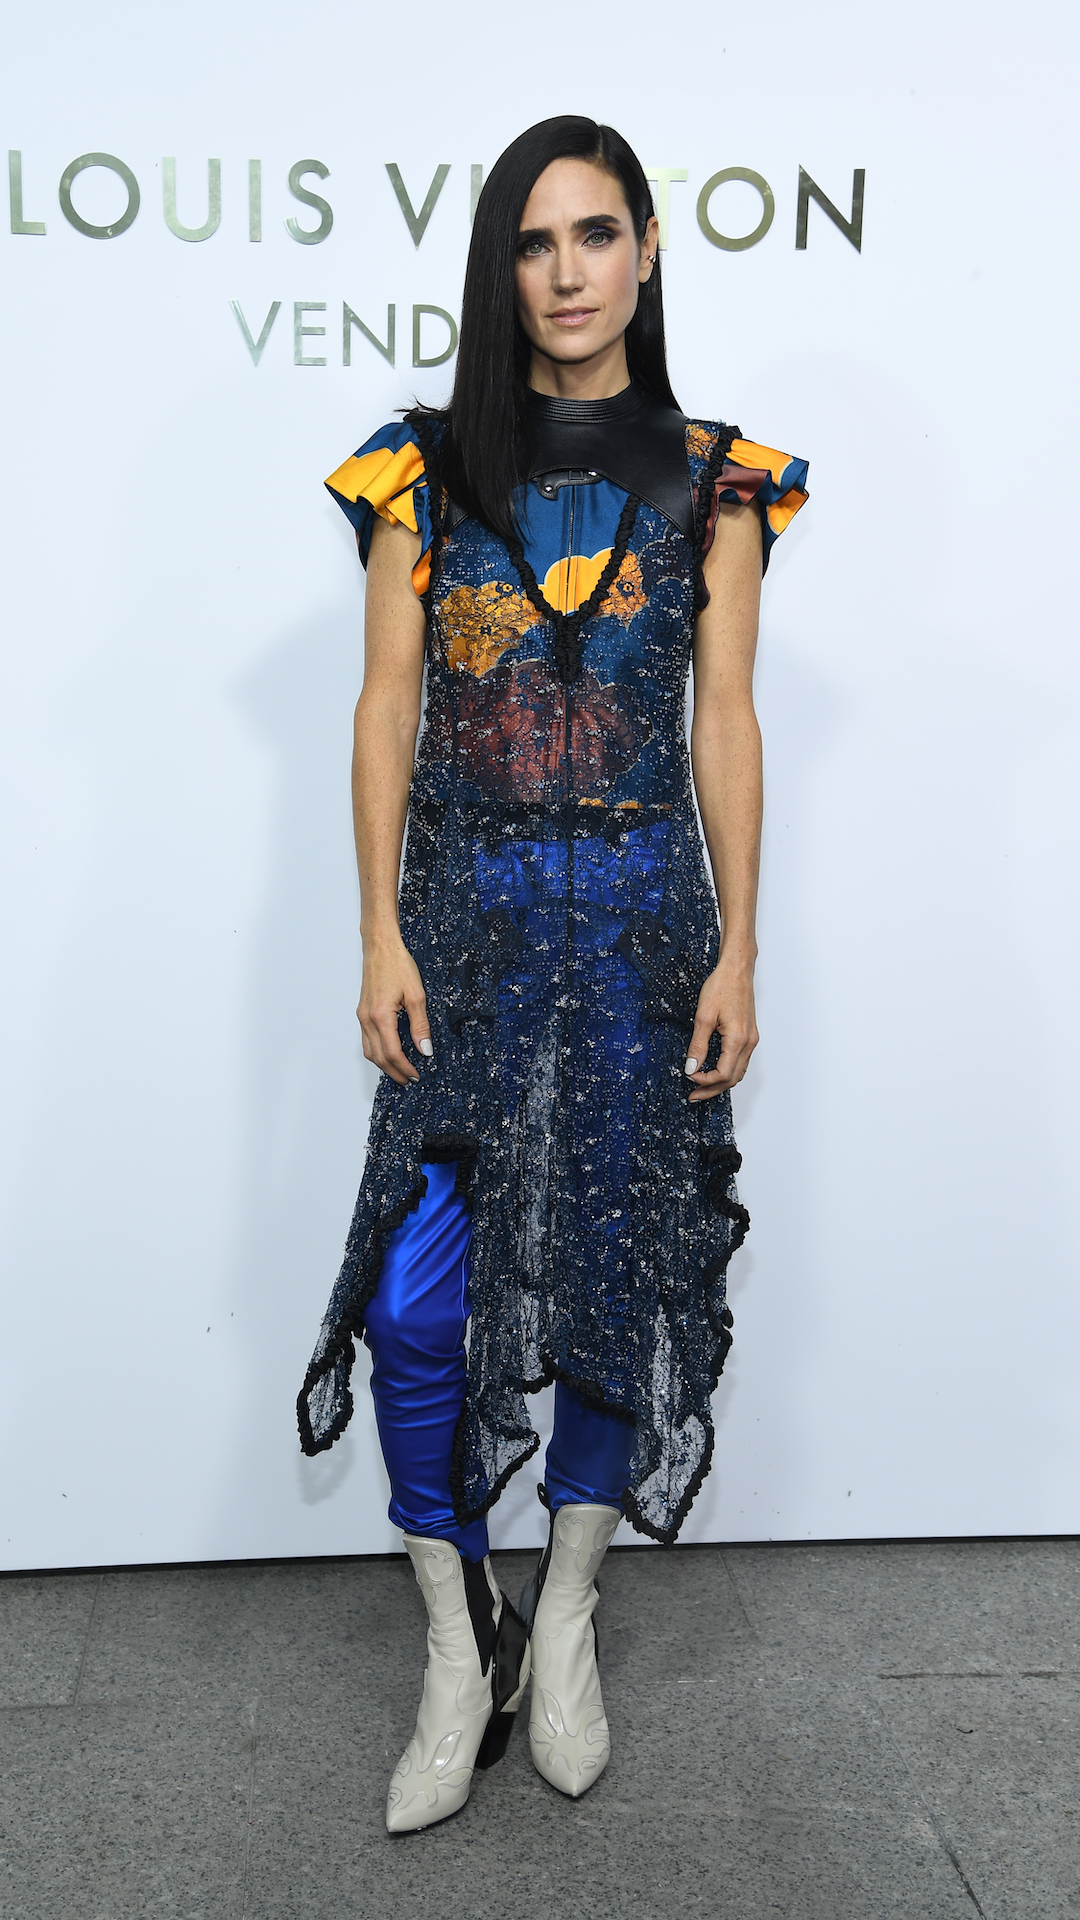 <p>                     Connelly isn't afraid to push fashion boundaries, and her adventurous style was on full display at the opening of the Louis Vuitton boutique during Paris Fashion Week in 2017. The actress wore a sheer black short-sleeved dress over a pair of shiny cobalt blue trousers, which she paired with a colourful top with ruffled shoulders. She finished off the quirky ensemble with a pair of white cowboy boots.                   </p>